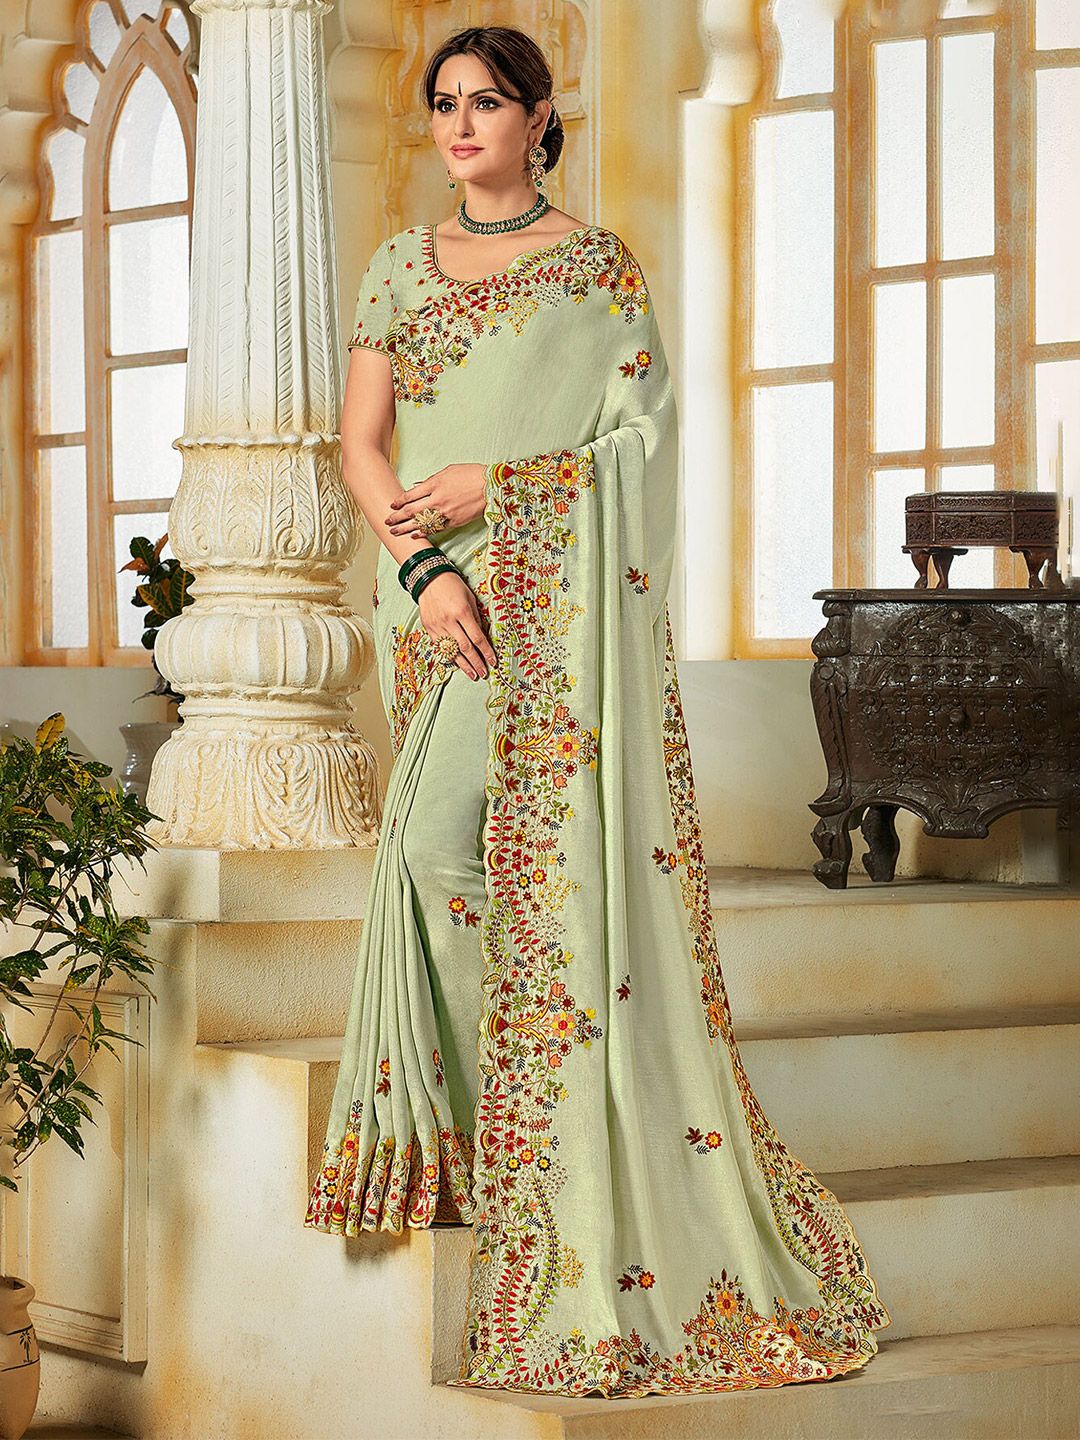 Laxmipati Floral Embroidered Saree Price in India